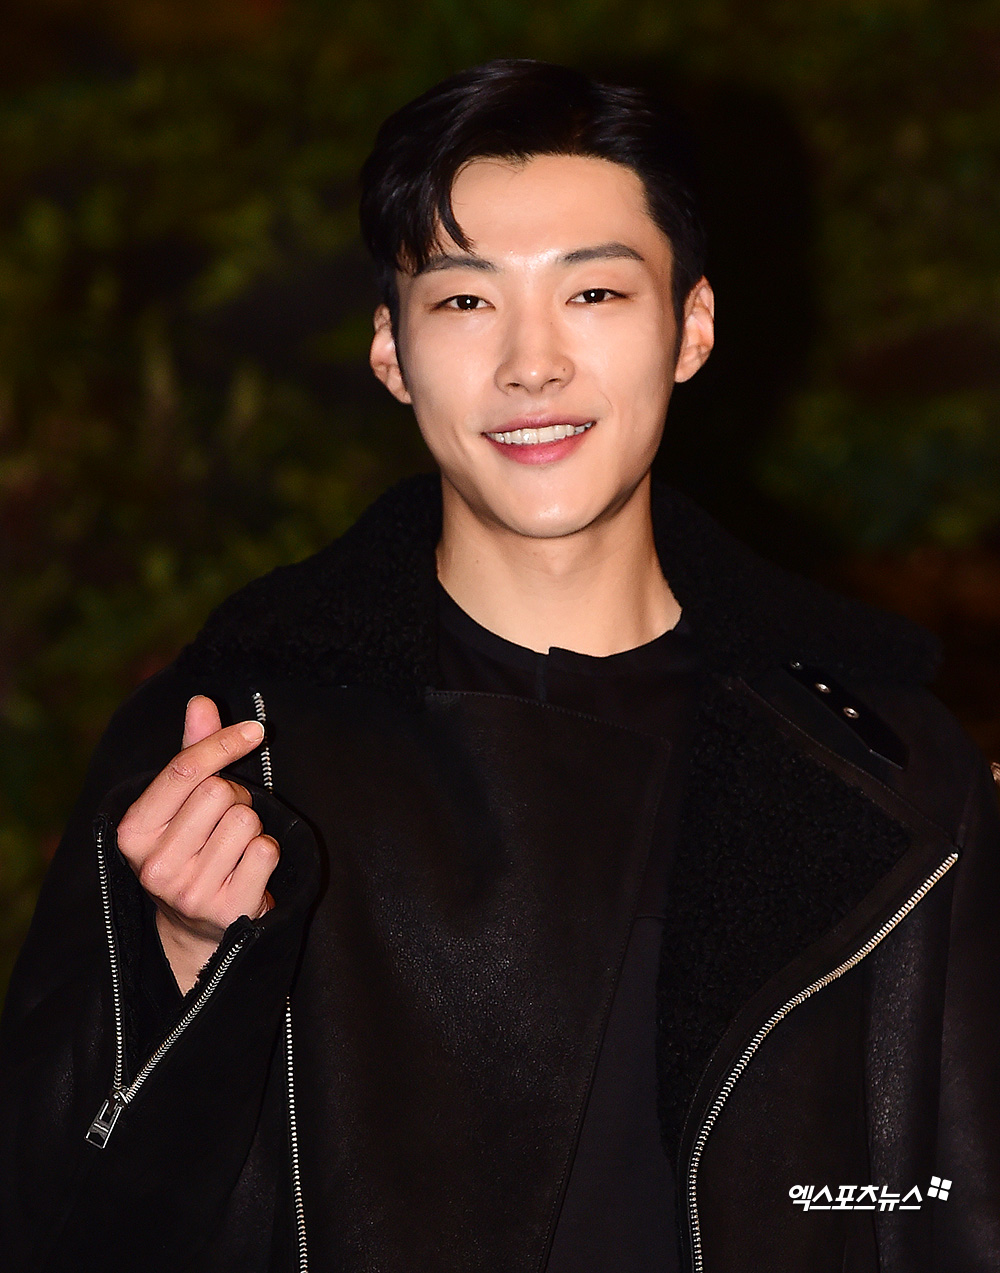 Actor Woo Do-hwan fulfills his duty of defense.Woo Do-hwan posted his handwritten letter on his Instagram and said, I am sorry that I can not meet directly and say hello. I was happy with every piece of love you sent me.Thank you for watching my twenties and loving me, so I was able to spend my 20s so happy. Woo Do-hwan posted a picture of his barricaded acting on his Instagram two days before Enlisted, soothing the fans regret.On the eve of Enlisted, he also posted a farewell photo with actor Lee Min-ho who accompanied SBS drama The King.Lee Min-ho posted a picture of Woo Do-hwans short-cut head on his Instagram and saw Woo Do-hwan with the words Infant is now the first gun.Young is the name of Woo Do-hwans The King role.Woo Do-hwan posted the same photo and boasted of the delight in the drama setting, leaving the word I will come and see you.Lee Min-ho, who is in the photo released together, embraces Woo Do-hwan, and Woo Do-hwan is also smiling and holding Lee Min-ho.Meanwhile, Woo Do-hwan made his debut in 2011 with MBN drama I came back and came right.In 2016, he took a public stamp as a master snapback, and he was recognized for his recognition and acting skills as a candidate for the mens new impression in the Baeksang Arts Film category.In 2017, he was loved by OCN drama Save me Seok Dong-cheol, and he was surprised by his charming pace and stable acting ability in KBS 2TV drama Mad Dog.In the recent SBS drama The King: The Lord of Eternity, Cho Young and Cho Eun-seop have shown their high-quality acting skills as two roles.Photo: DB, Woo Do-hwan Instagram